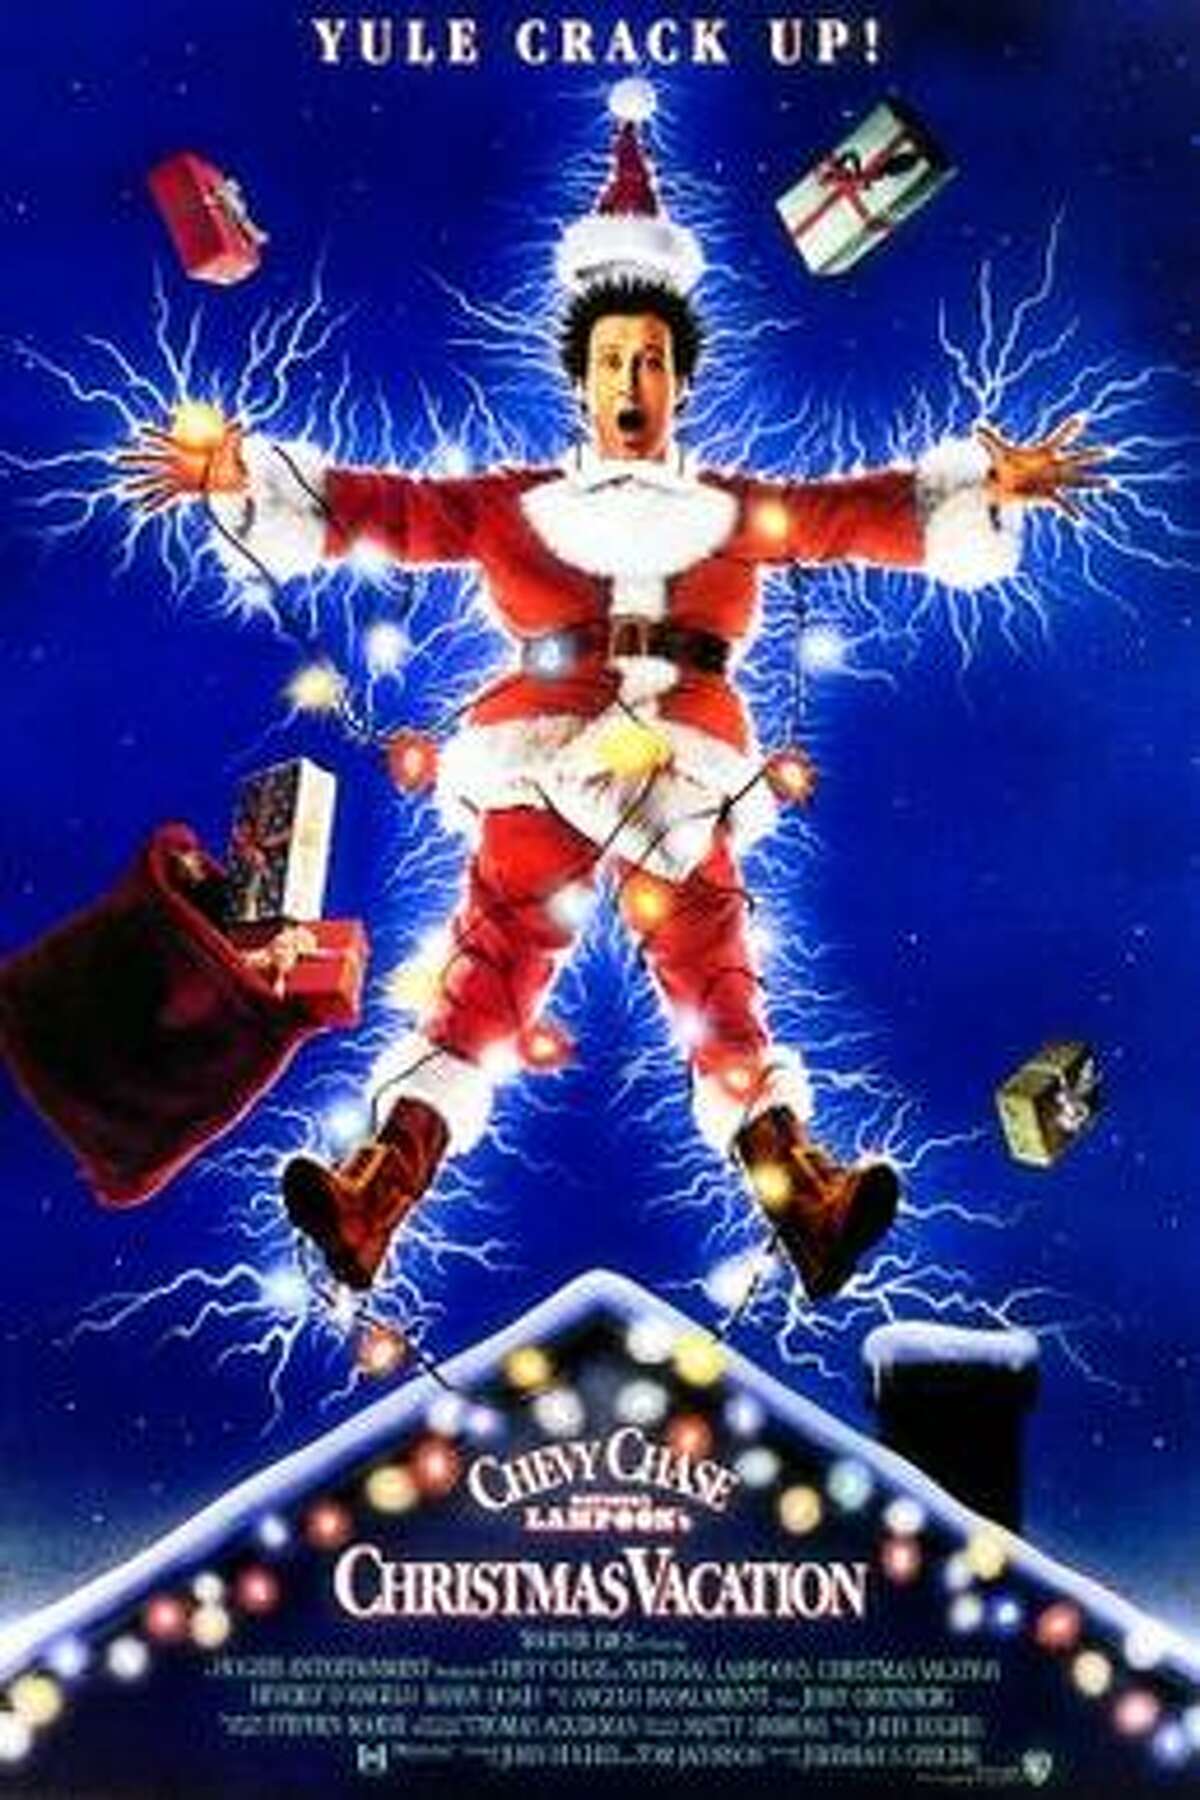 "National Lampoon's Christmas Vacation"